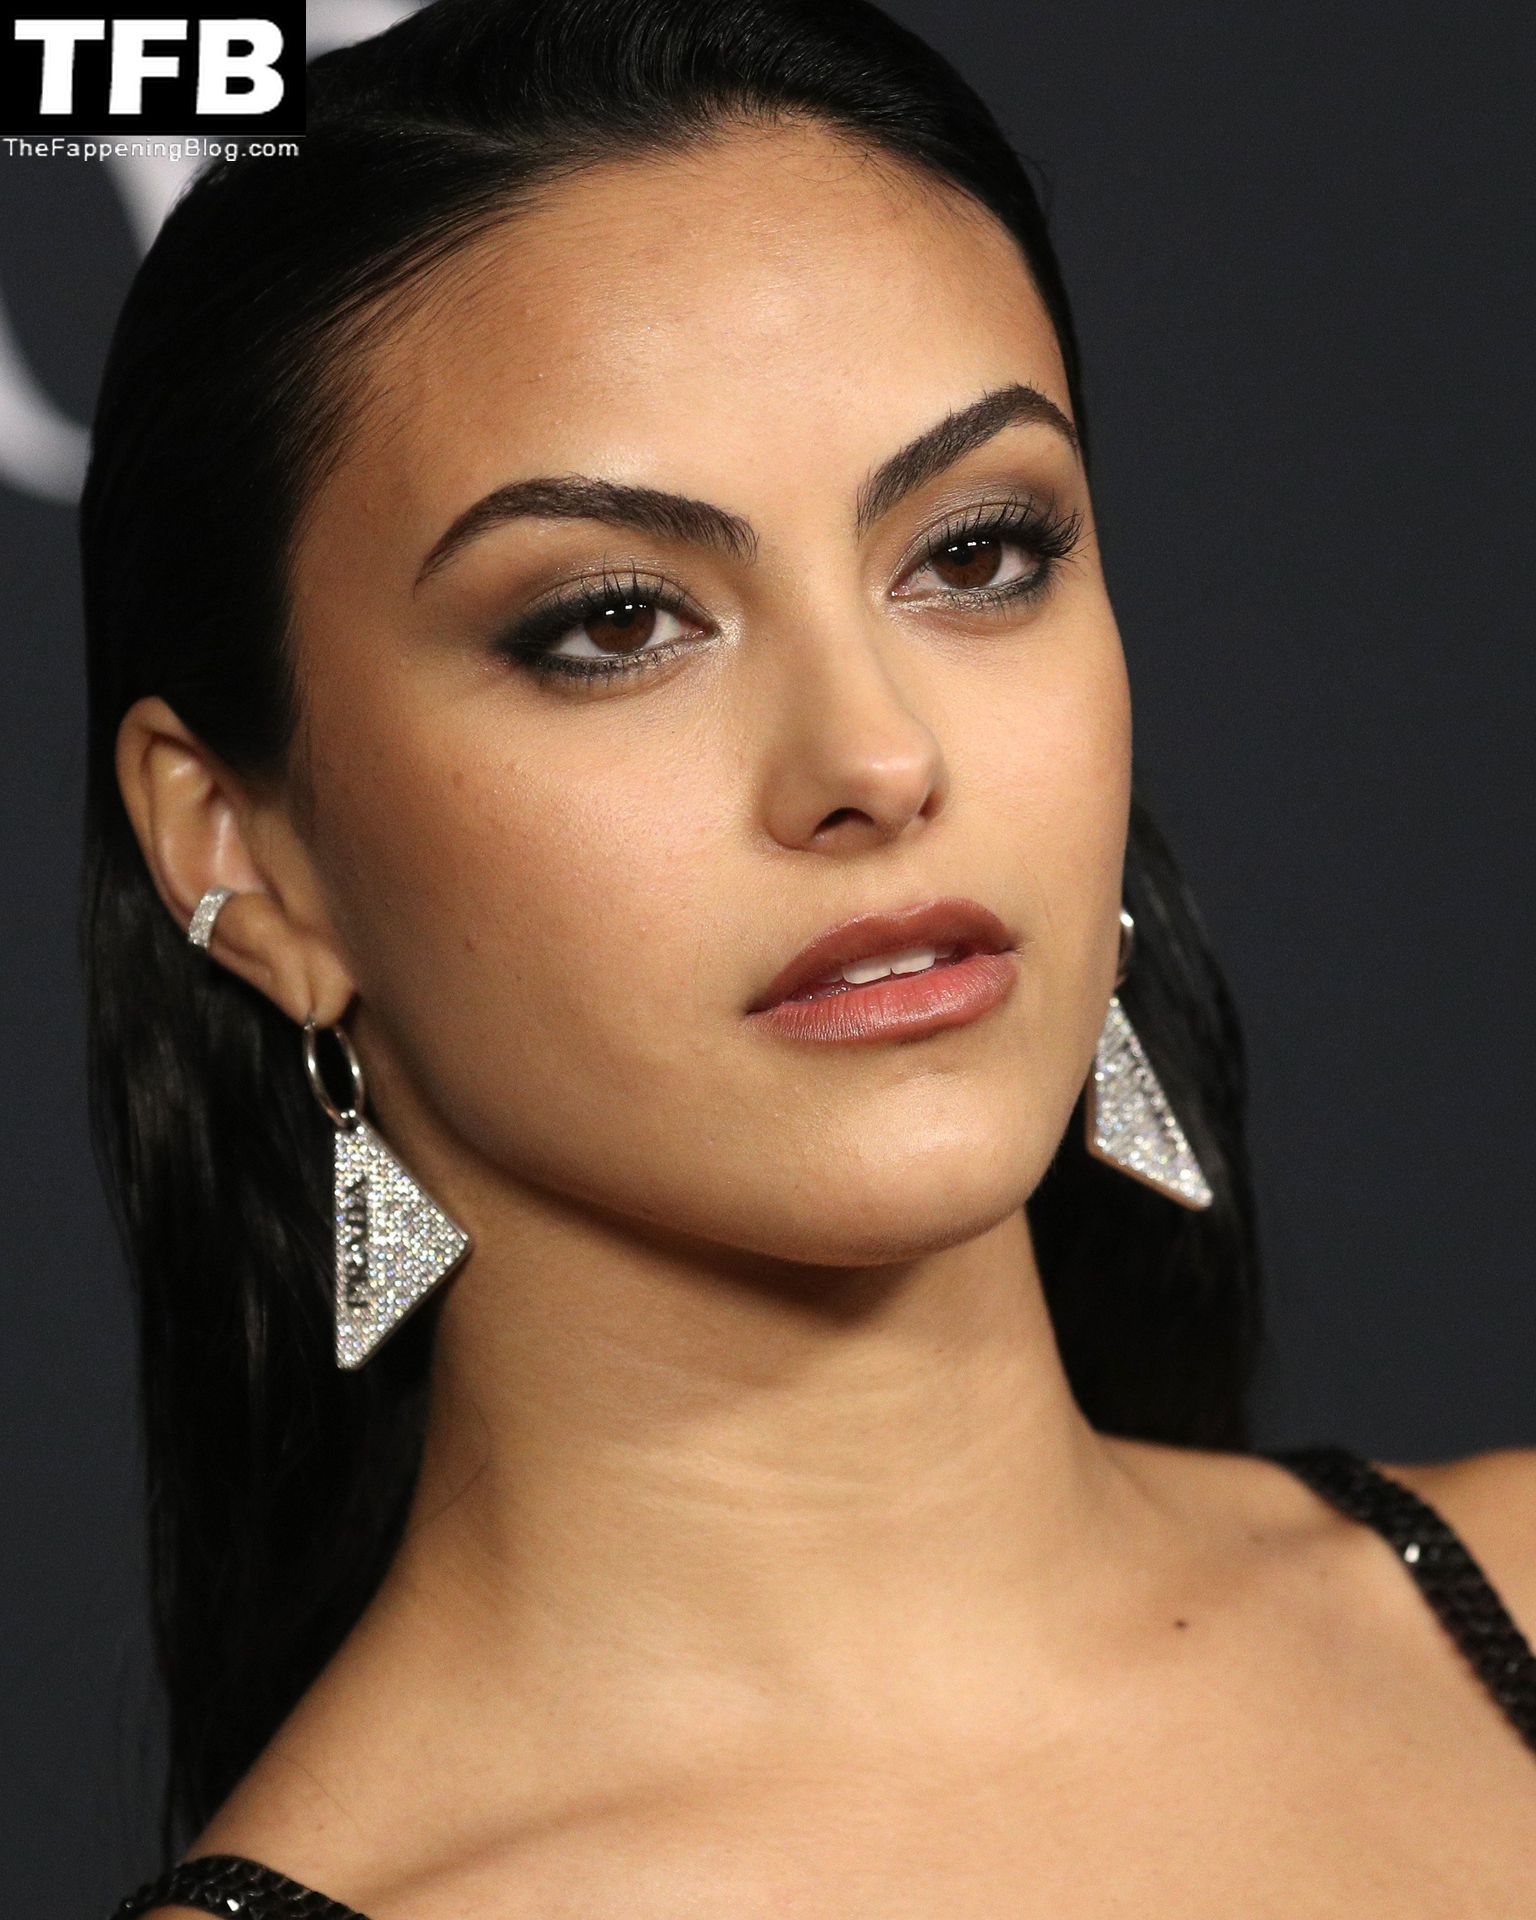 Camila-Mendes-See-Through-Tits-The-Fappening-Blog-82.jpg